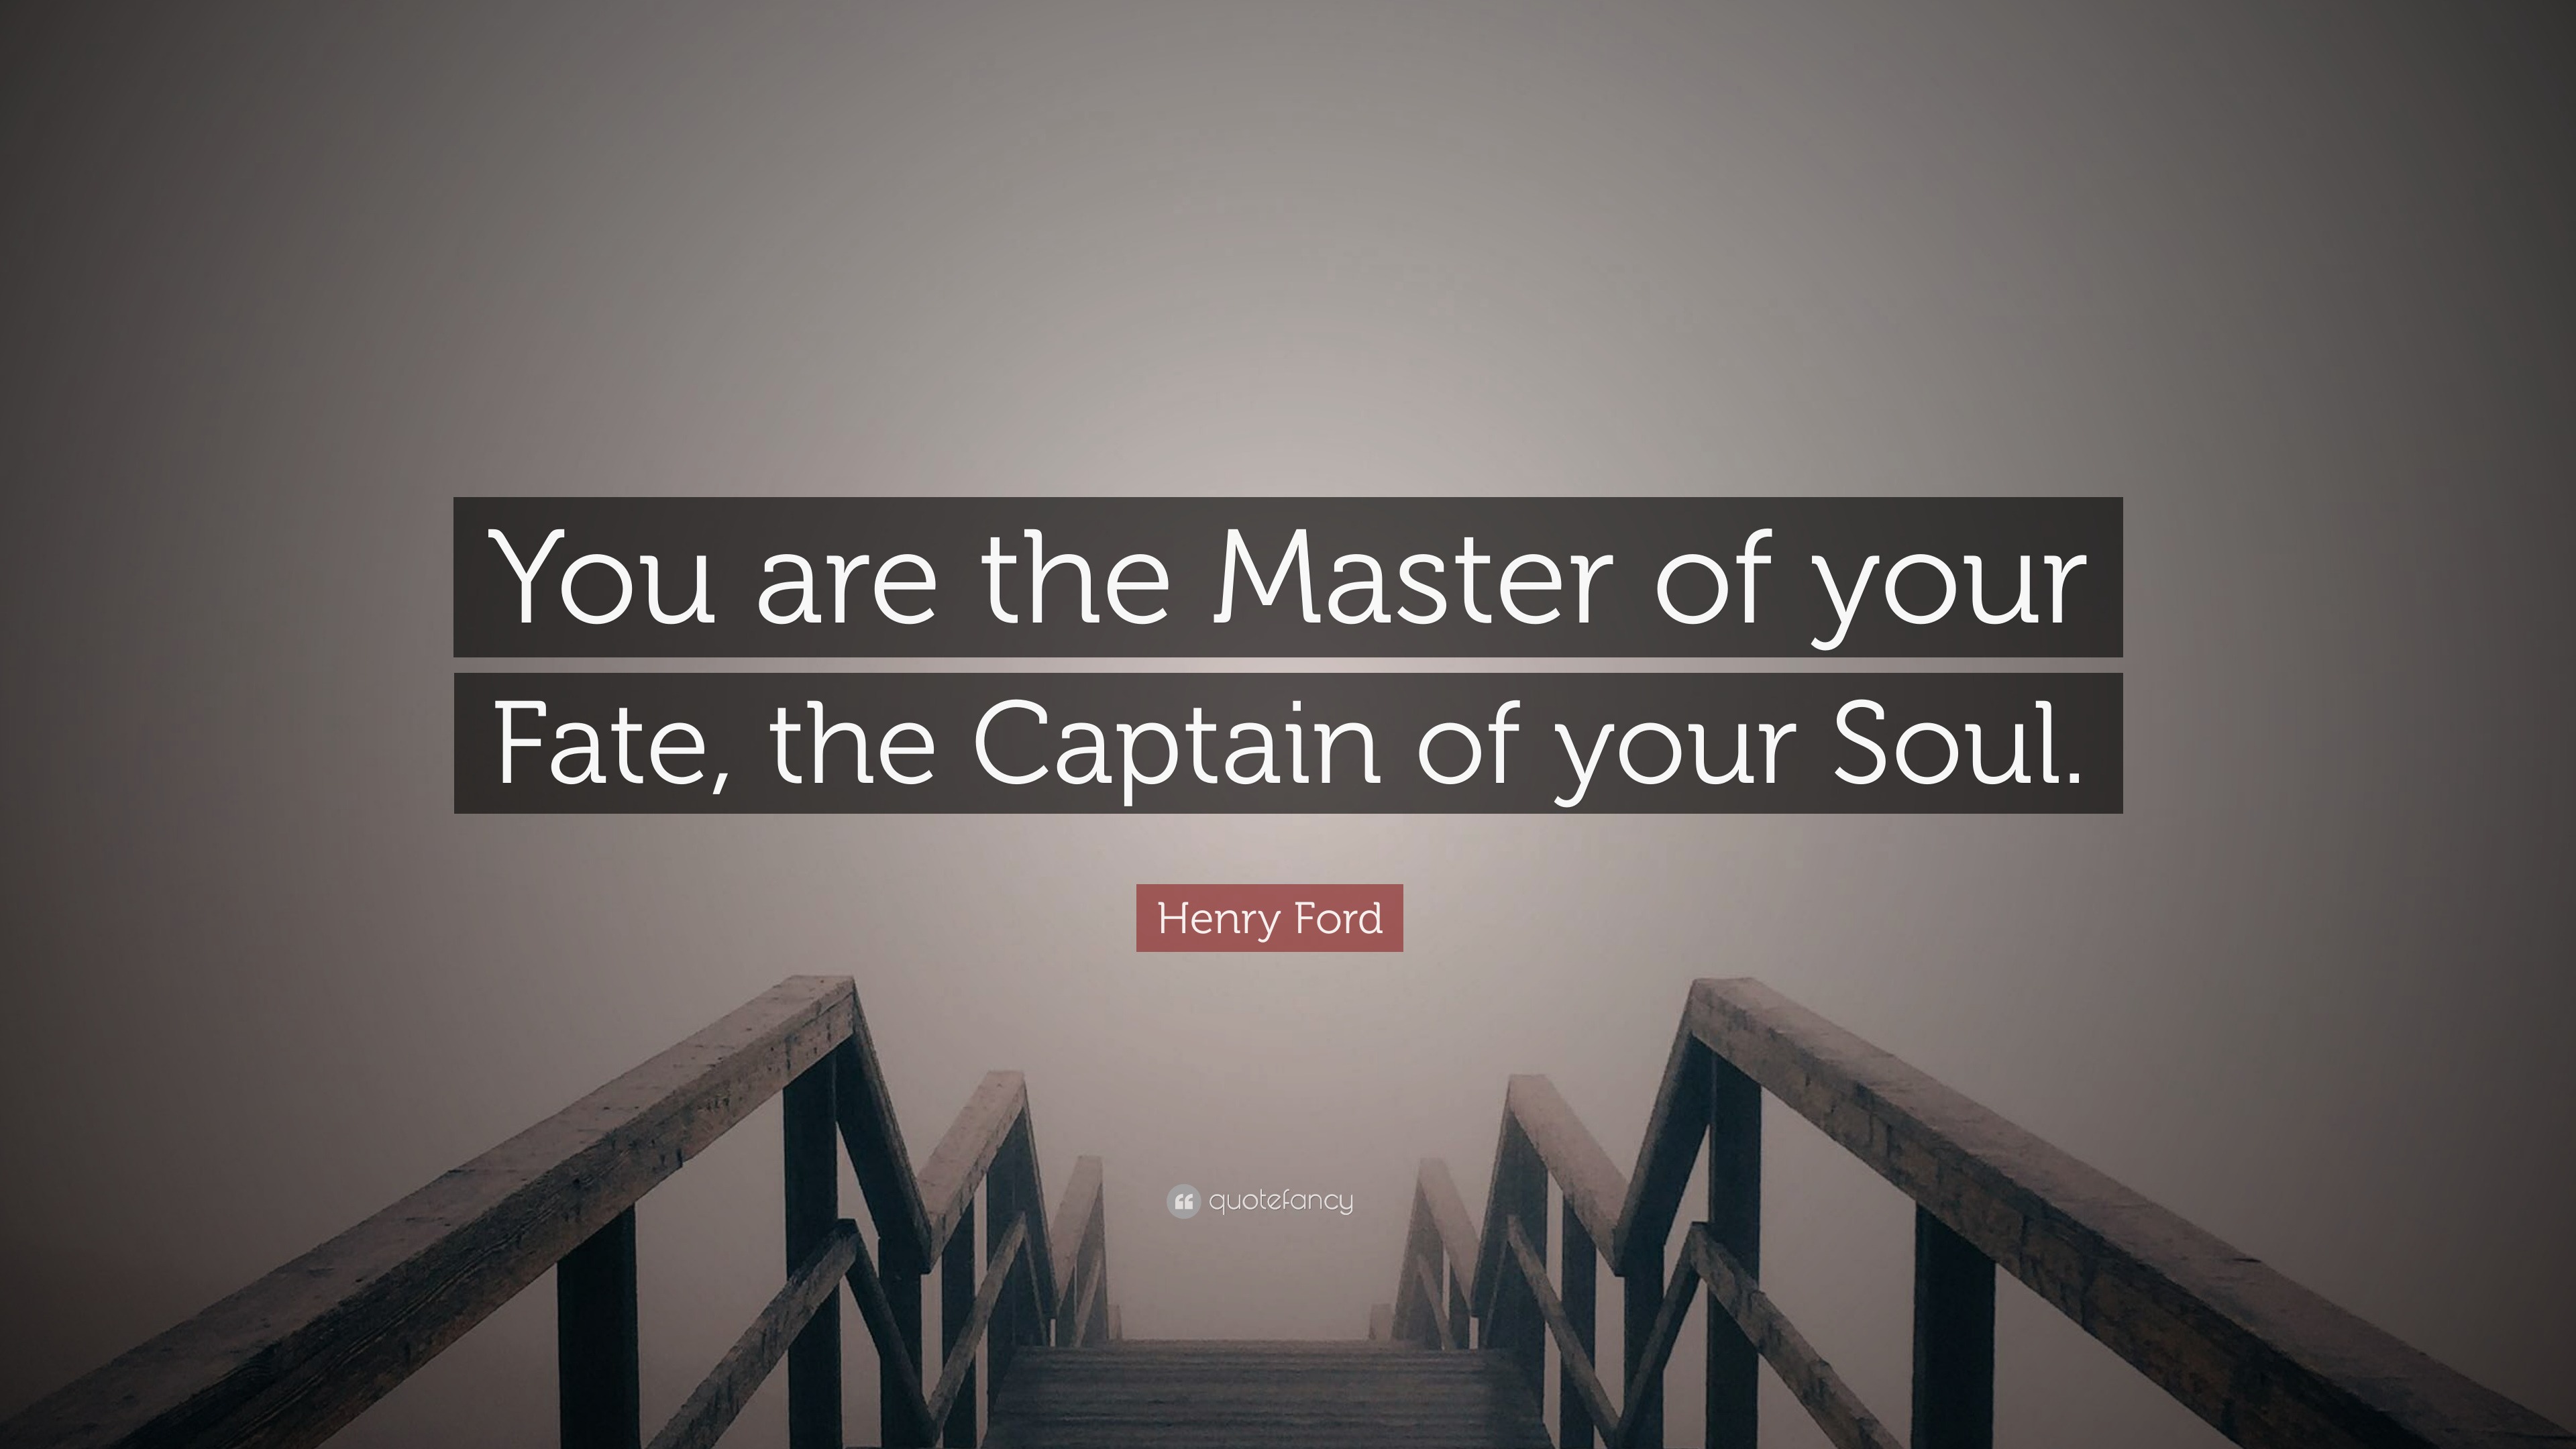 https://quotefancy.com/media/wallpaper/3840x2160/2065584-Henry-Ford-Quote-You-are-the-Master-of-your-Fate-the-Captain-of.jpg